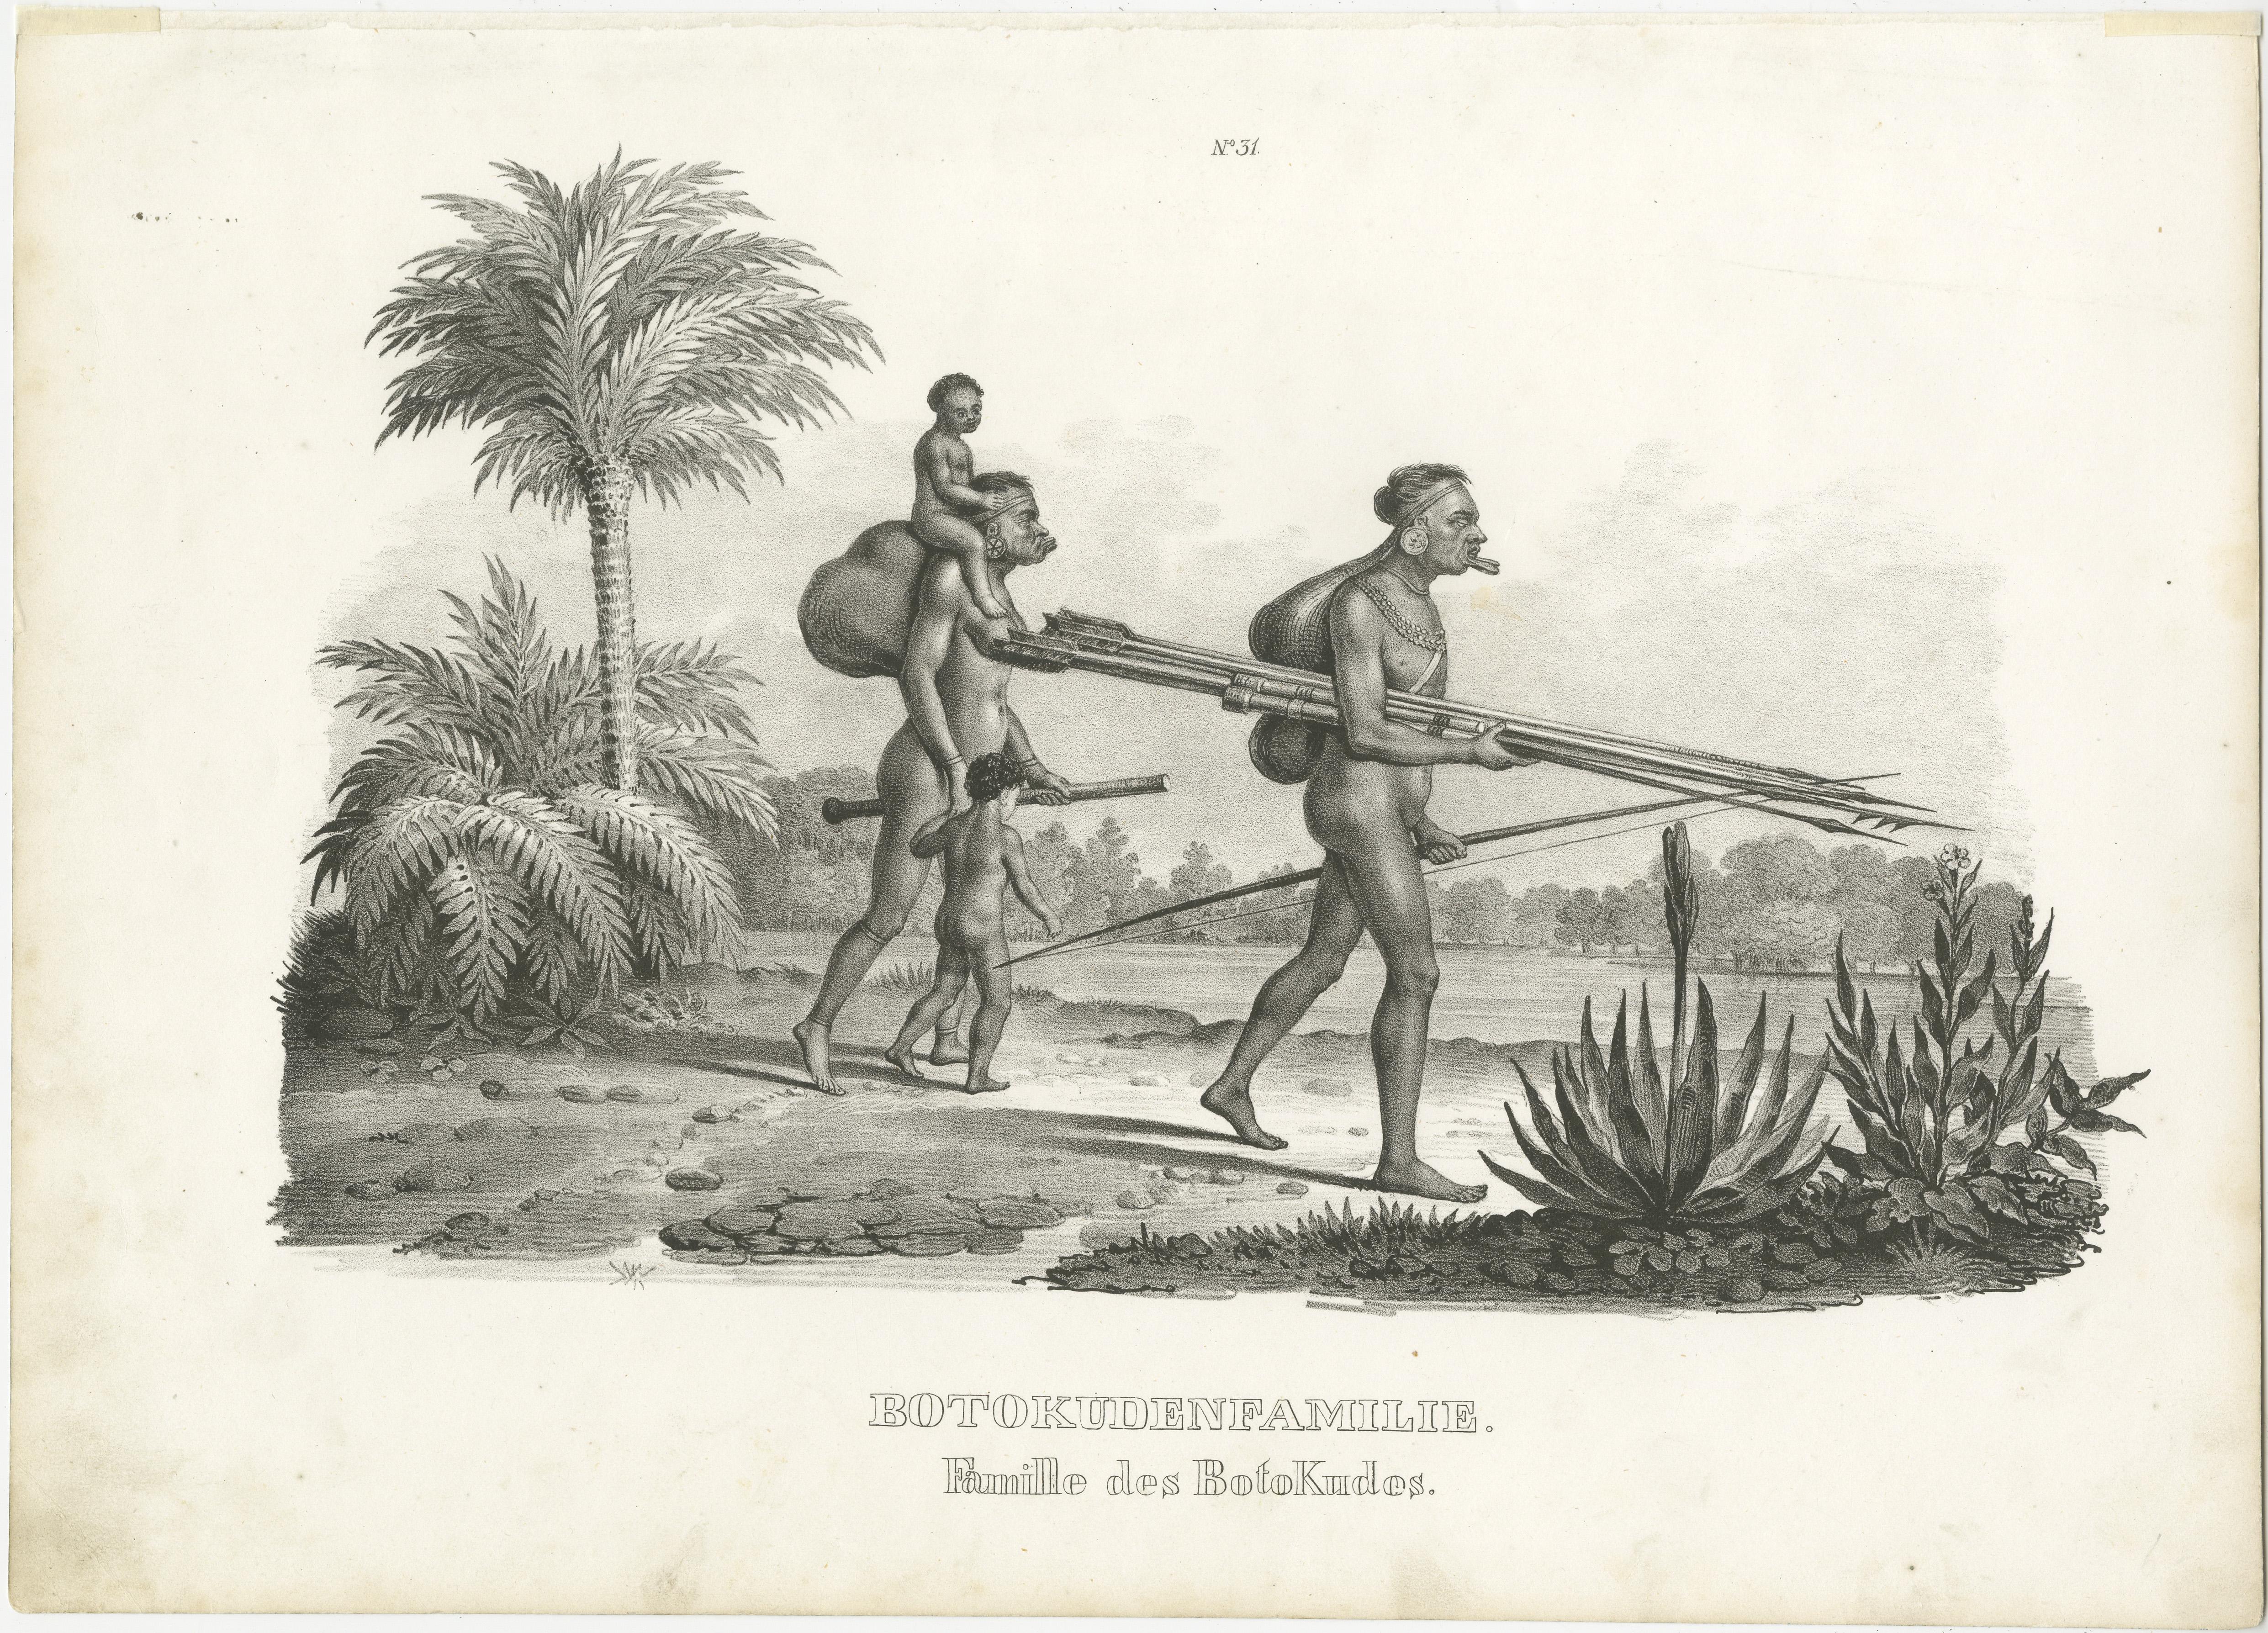 Antique print titled 'Botokudenfamilie. Famille des Botokudes'. Original antique steel engraving showing Botocudo, South American Indian people who lived in what is now the Brazilian state of Minas Gerais. Lithographed by Honegger. Published circa